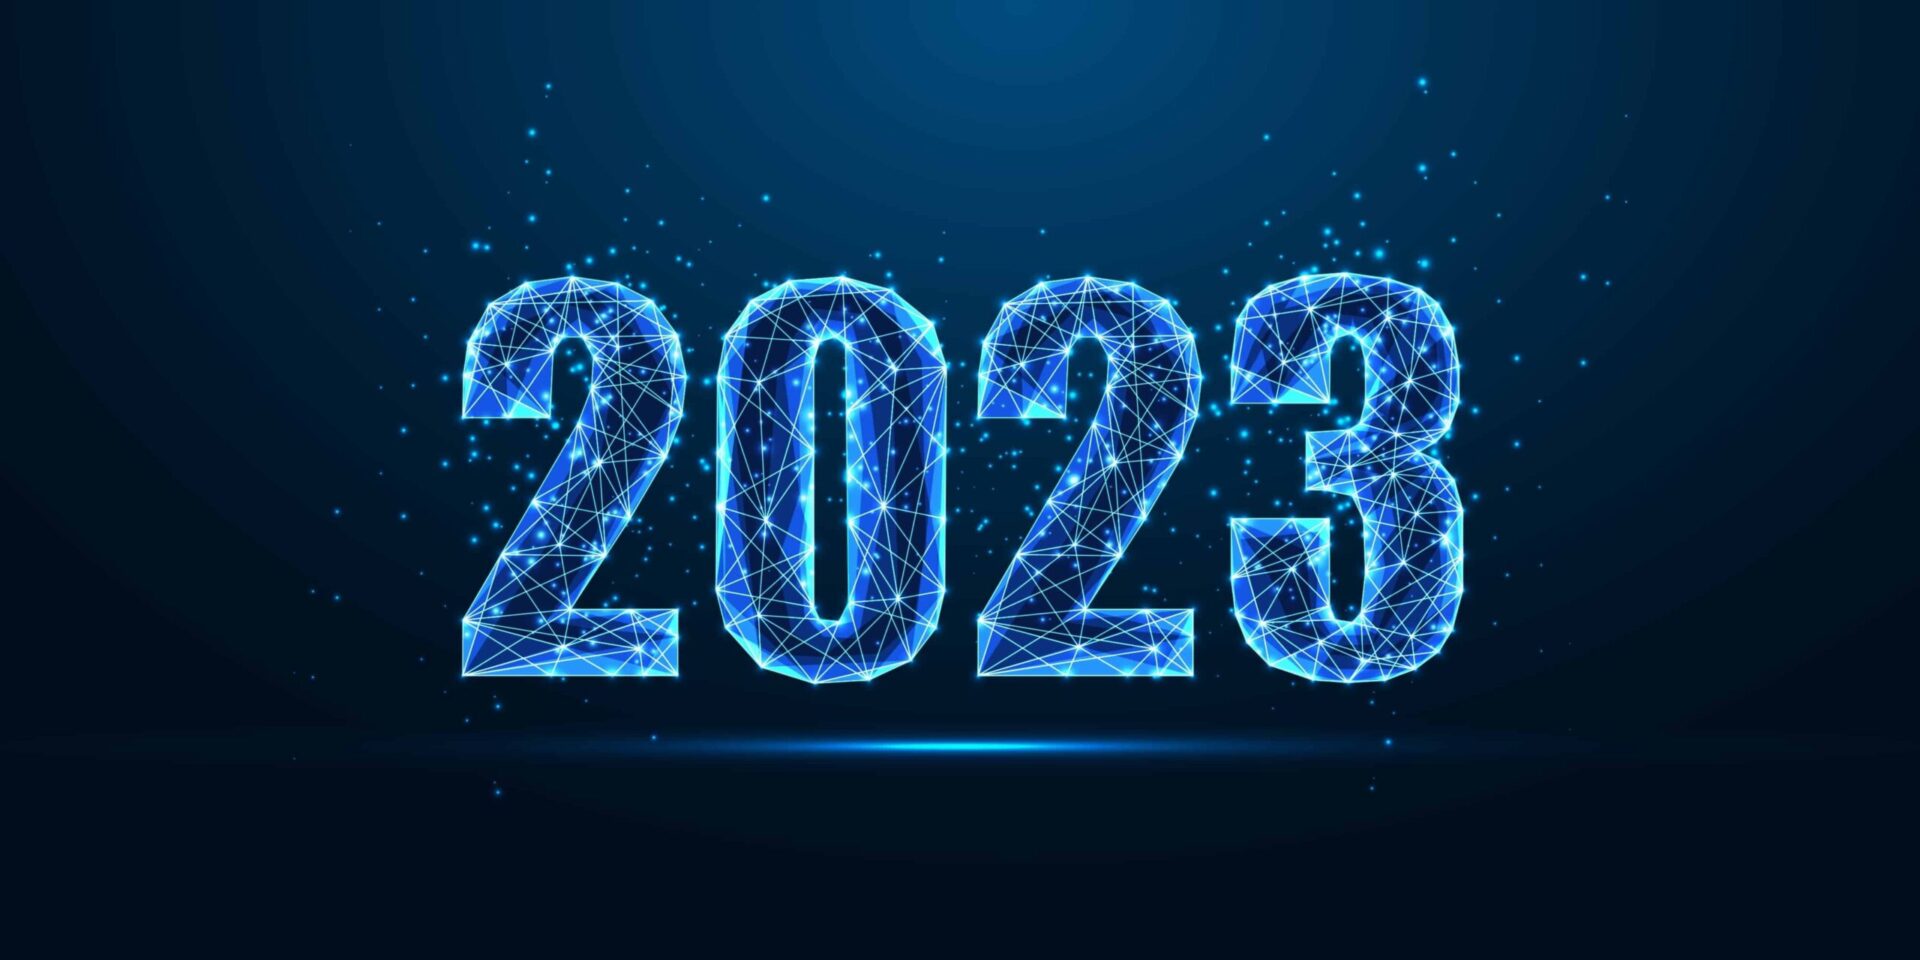 2023 enterprise network management trends visualized as the number 2023 composed of a glowing network of interconnected nodes (2)